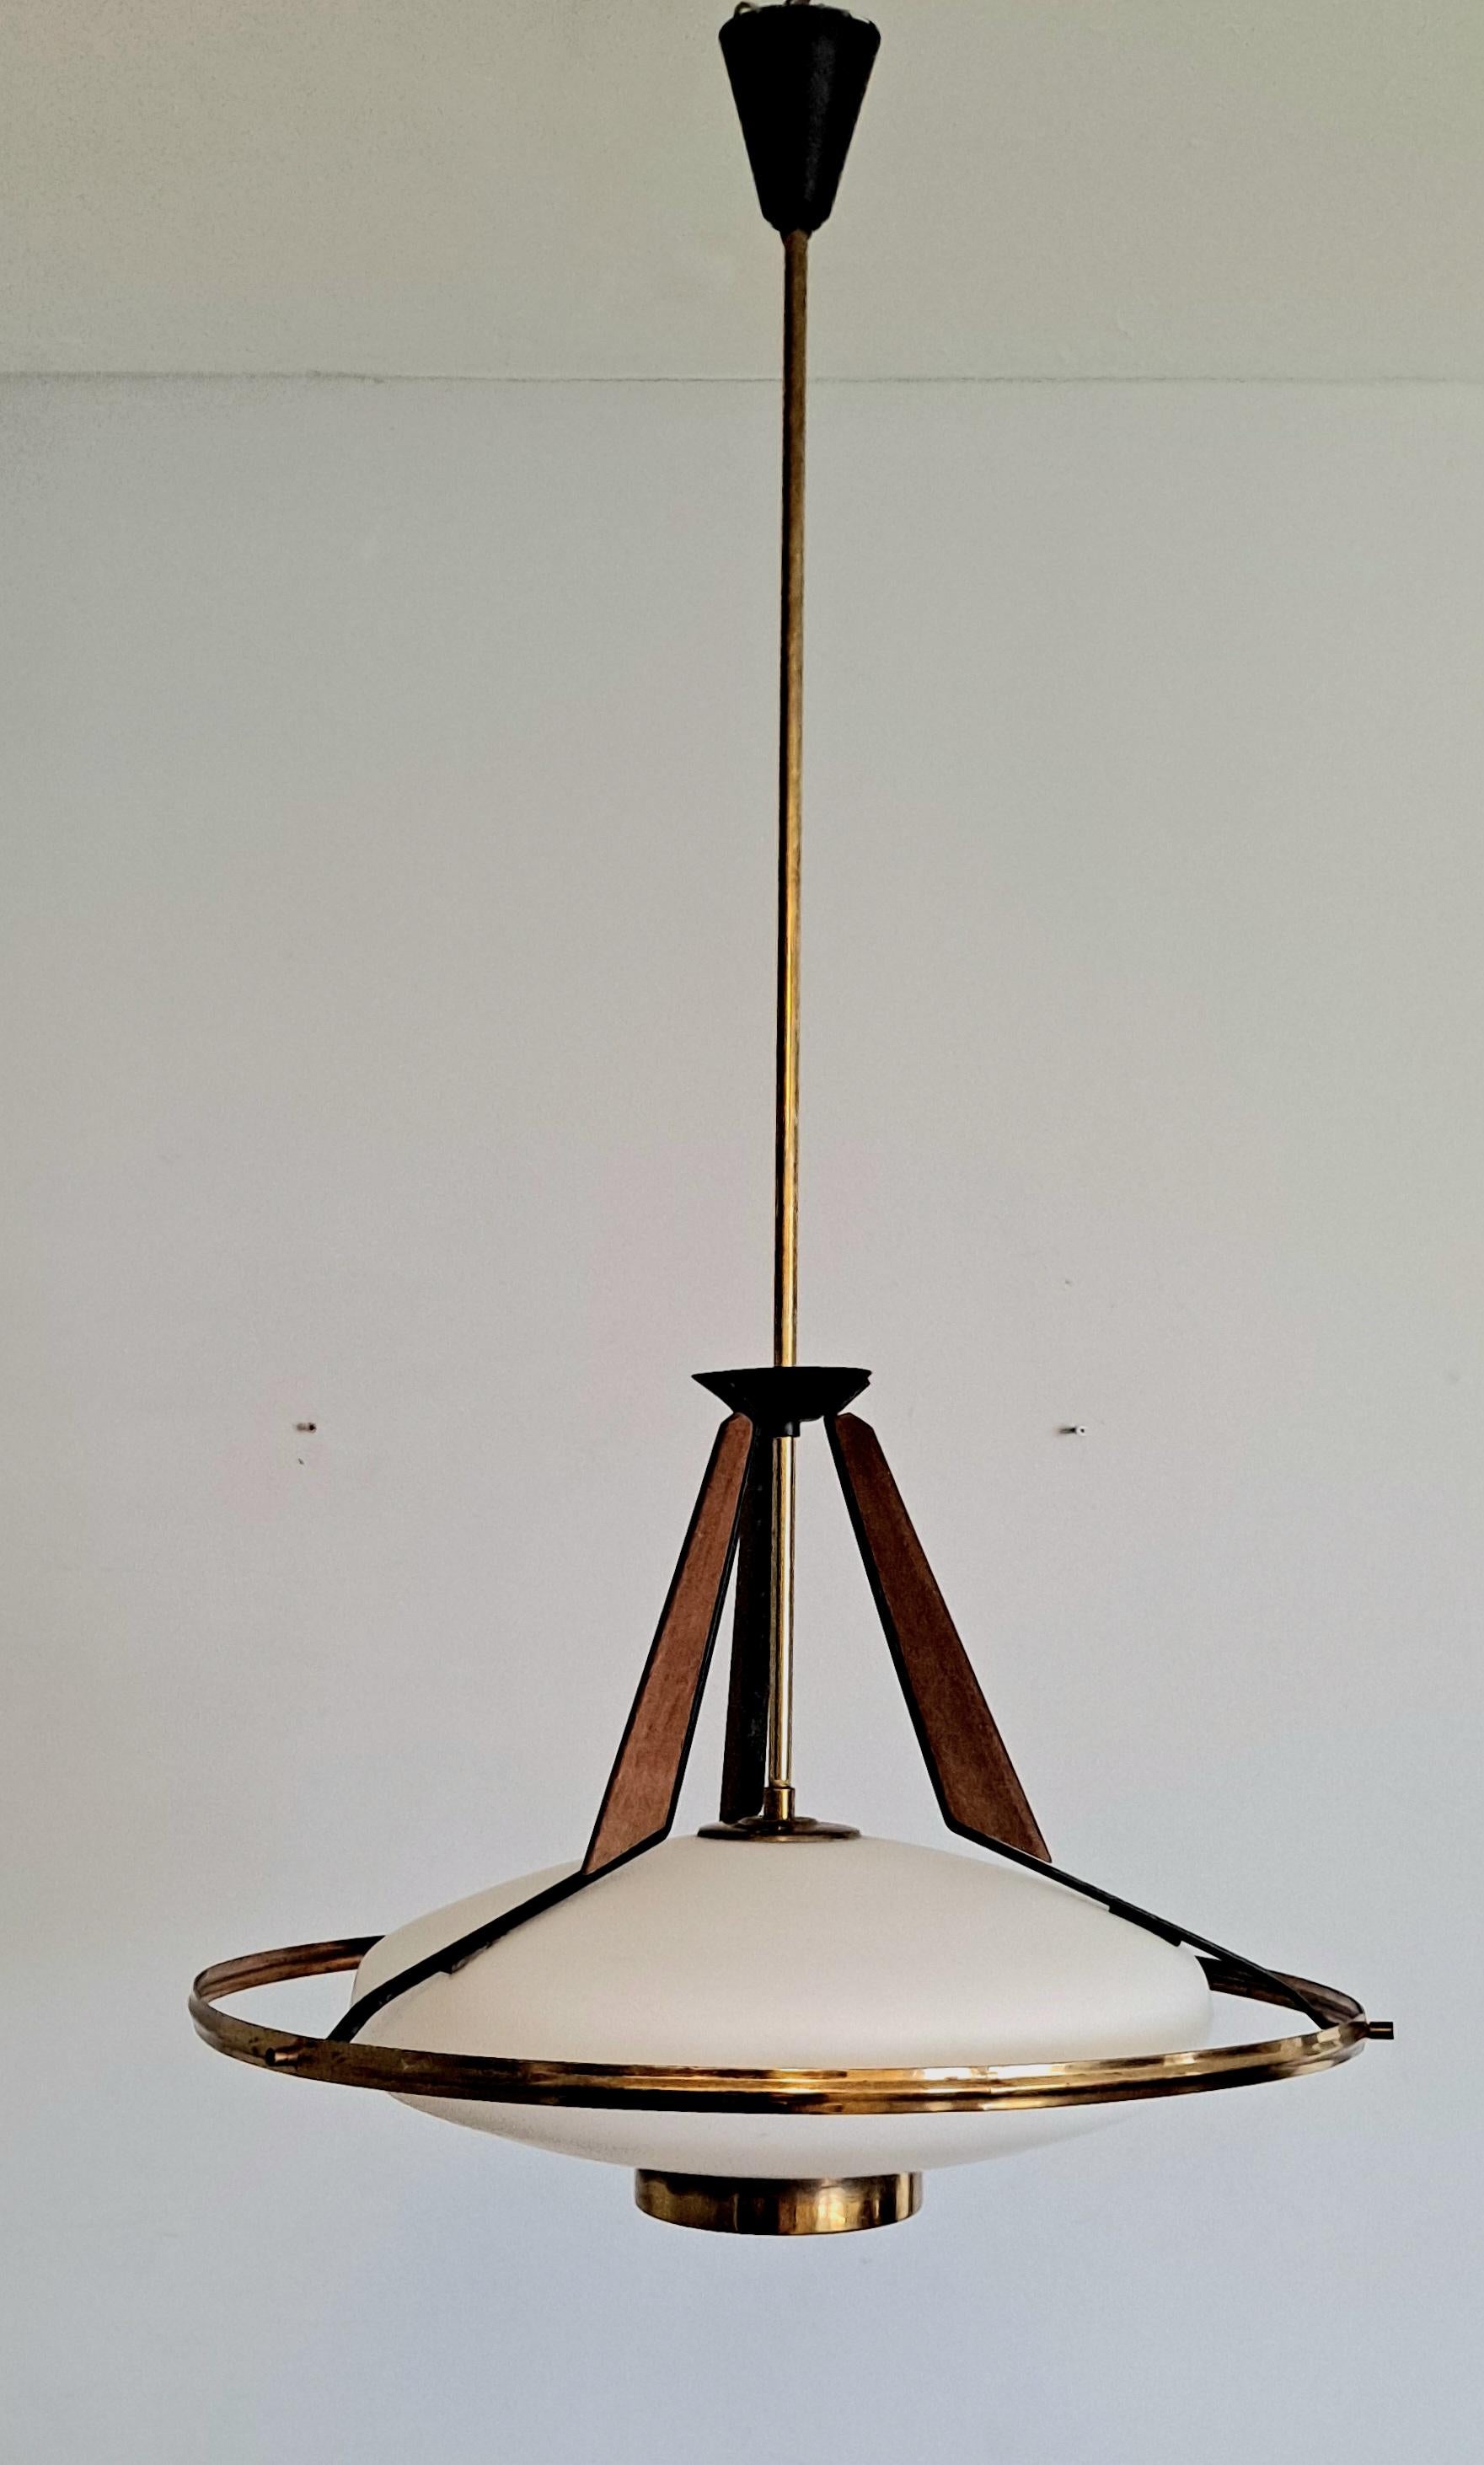 Elaborated chandelier  opaline glass shade and great teak and brass details. It was made in the 50s by Stilux Milano, Italy. Great original condition.
the chandelier can be shipped with the upper part dismantled which will lover the UPS  standard